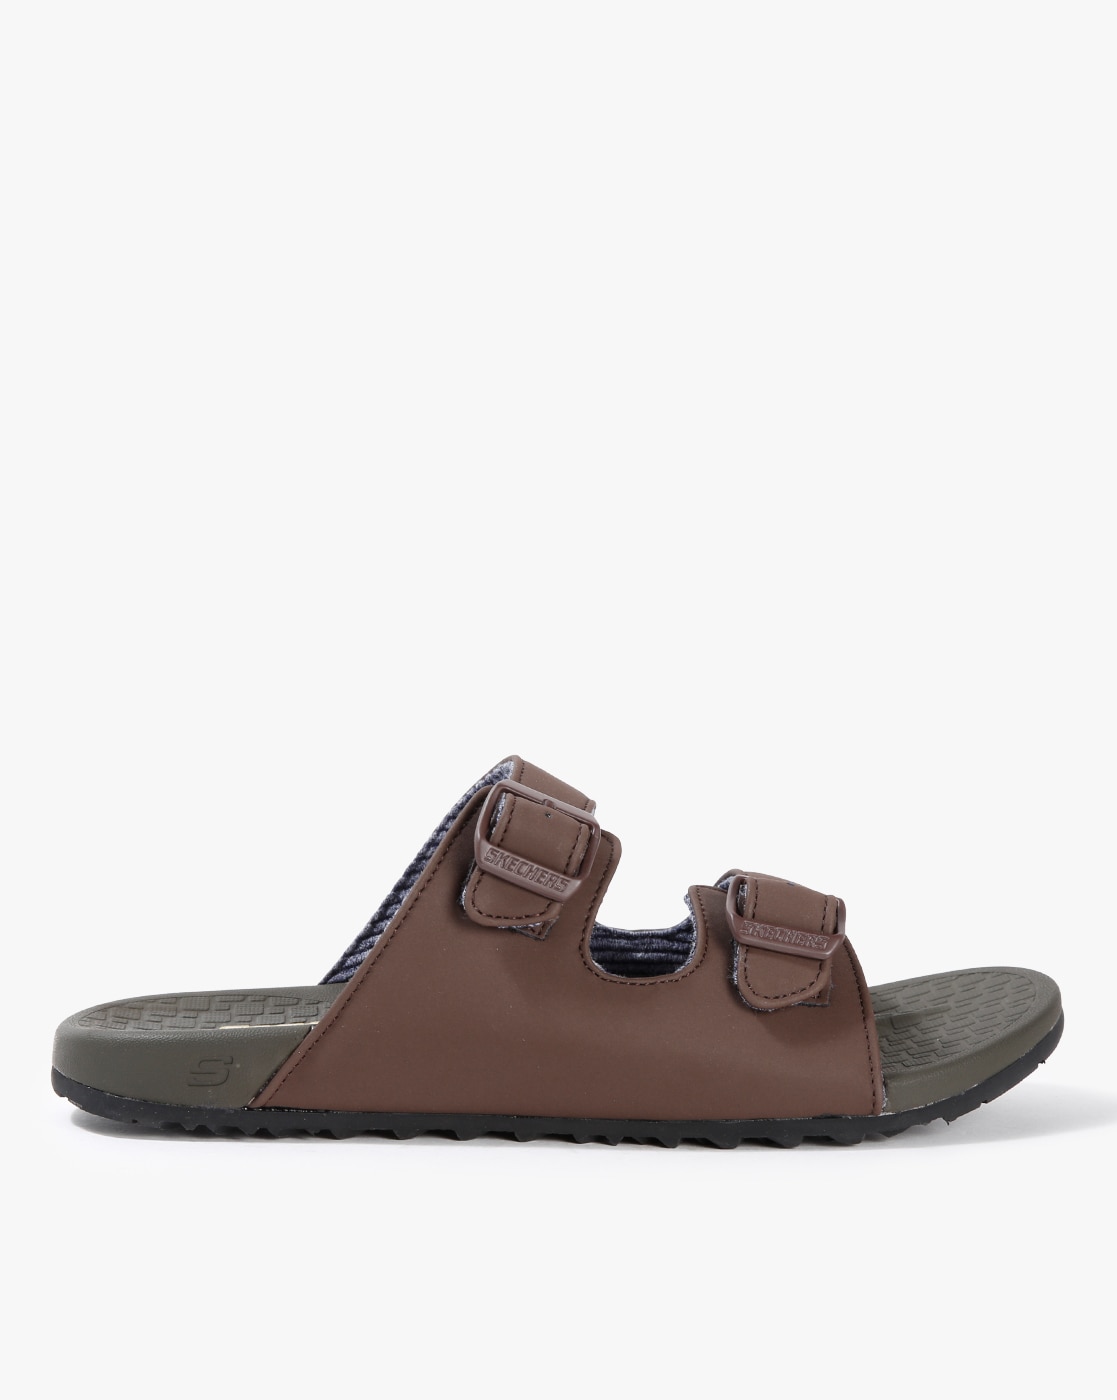 Buy Brown Sports Sandals for Men by 